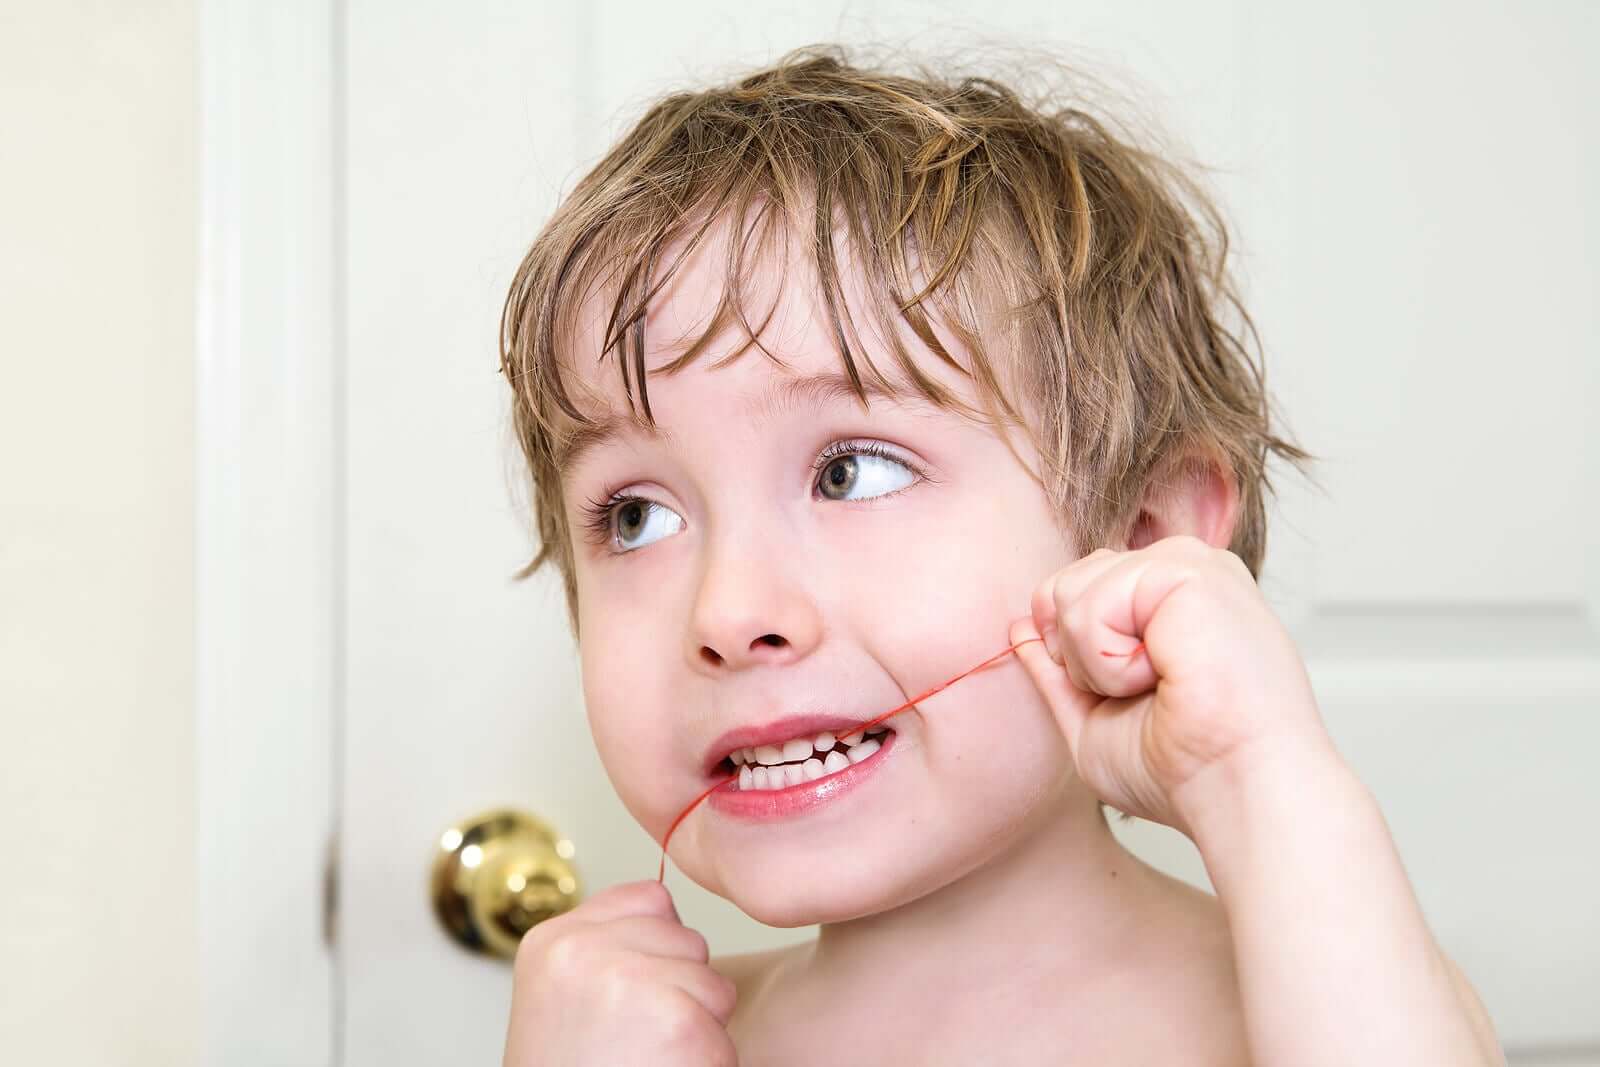 A young boy flossing.